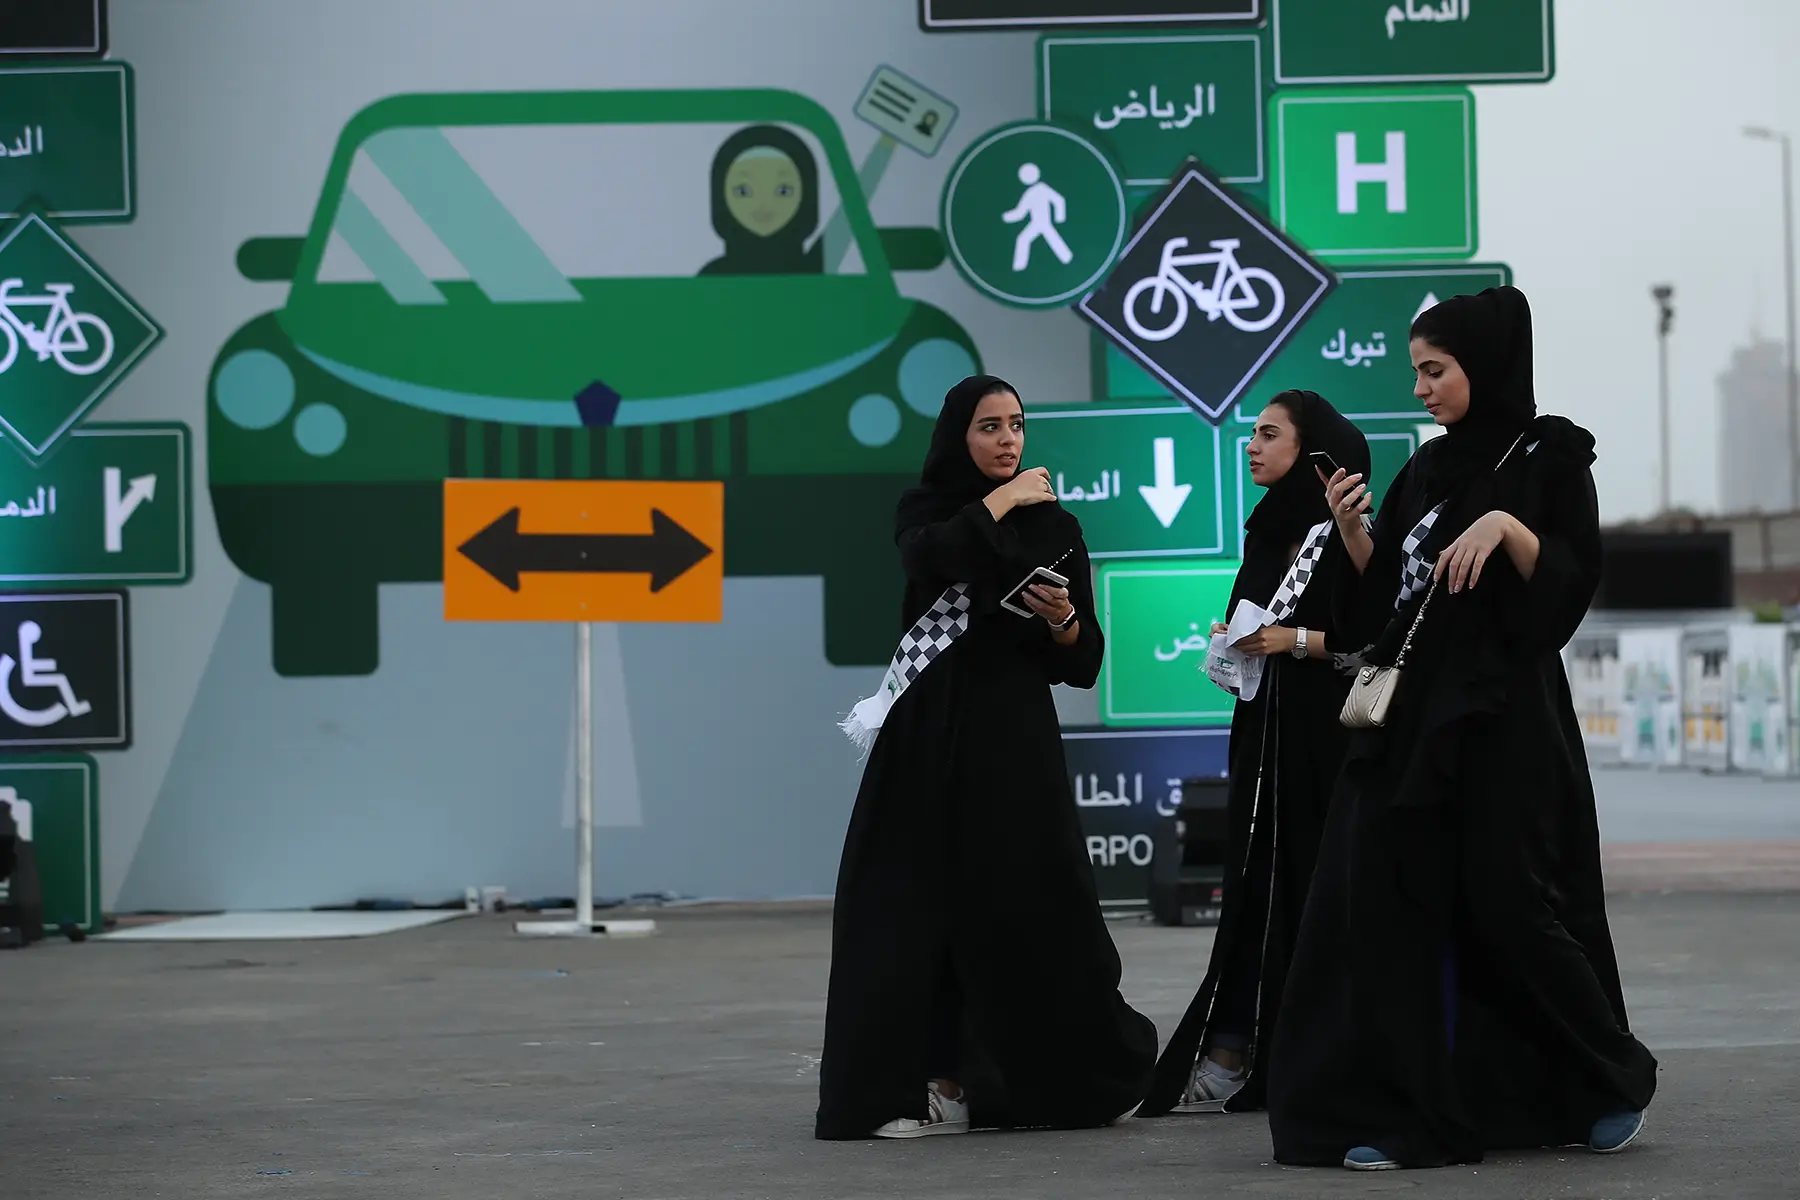 A group of three women in abayas outside a driving school